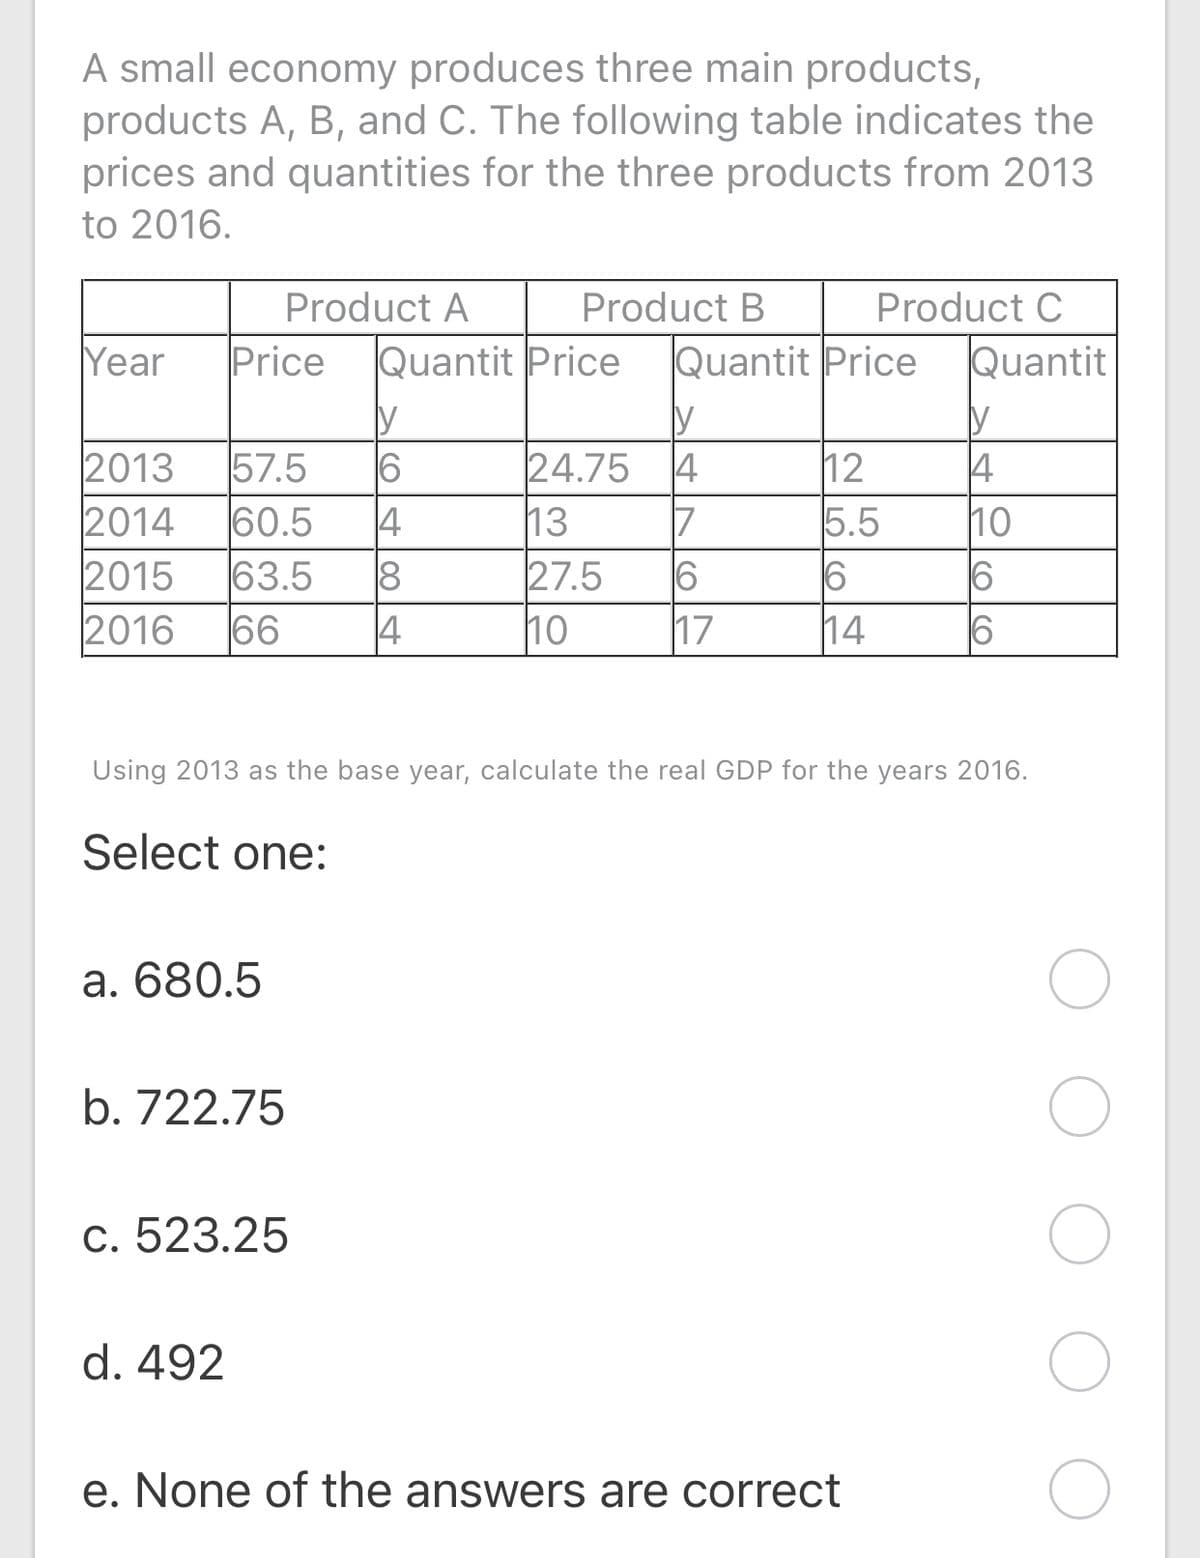 A small economy produces three main products,
products A, B, and C. The following table indicates the
prices and quantities for the three products from 2013
to 2016.
Product A
Product B
Product C
Year
Price
Quantit Price
Quantit Price
Quantit
y
4
57.5
2013
2014
6
24.75
13
27.5
17
12
5.5
4
10
60.5
4
63.5
66
|7
8
16
2015
2016
4
10
14
Using 2013 as the base year, calculate the real GDP for the years 2016.
Select one:
а. 680.5
b. 722.75
c. 523.25
d. 492
e. None of the answers are correct
(o CO
LO
